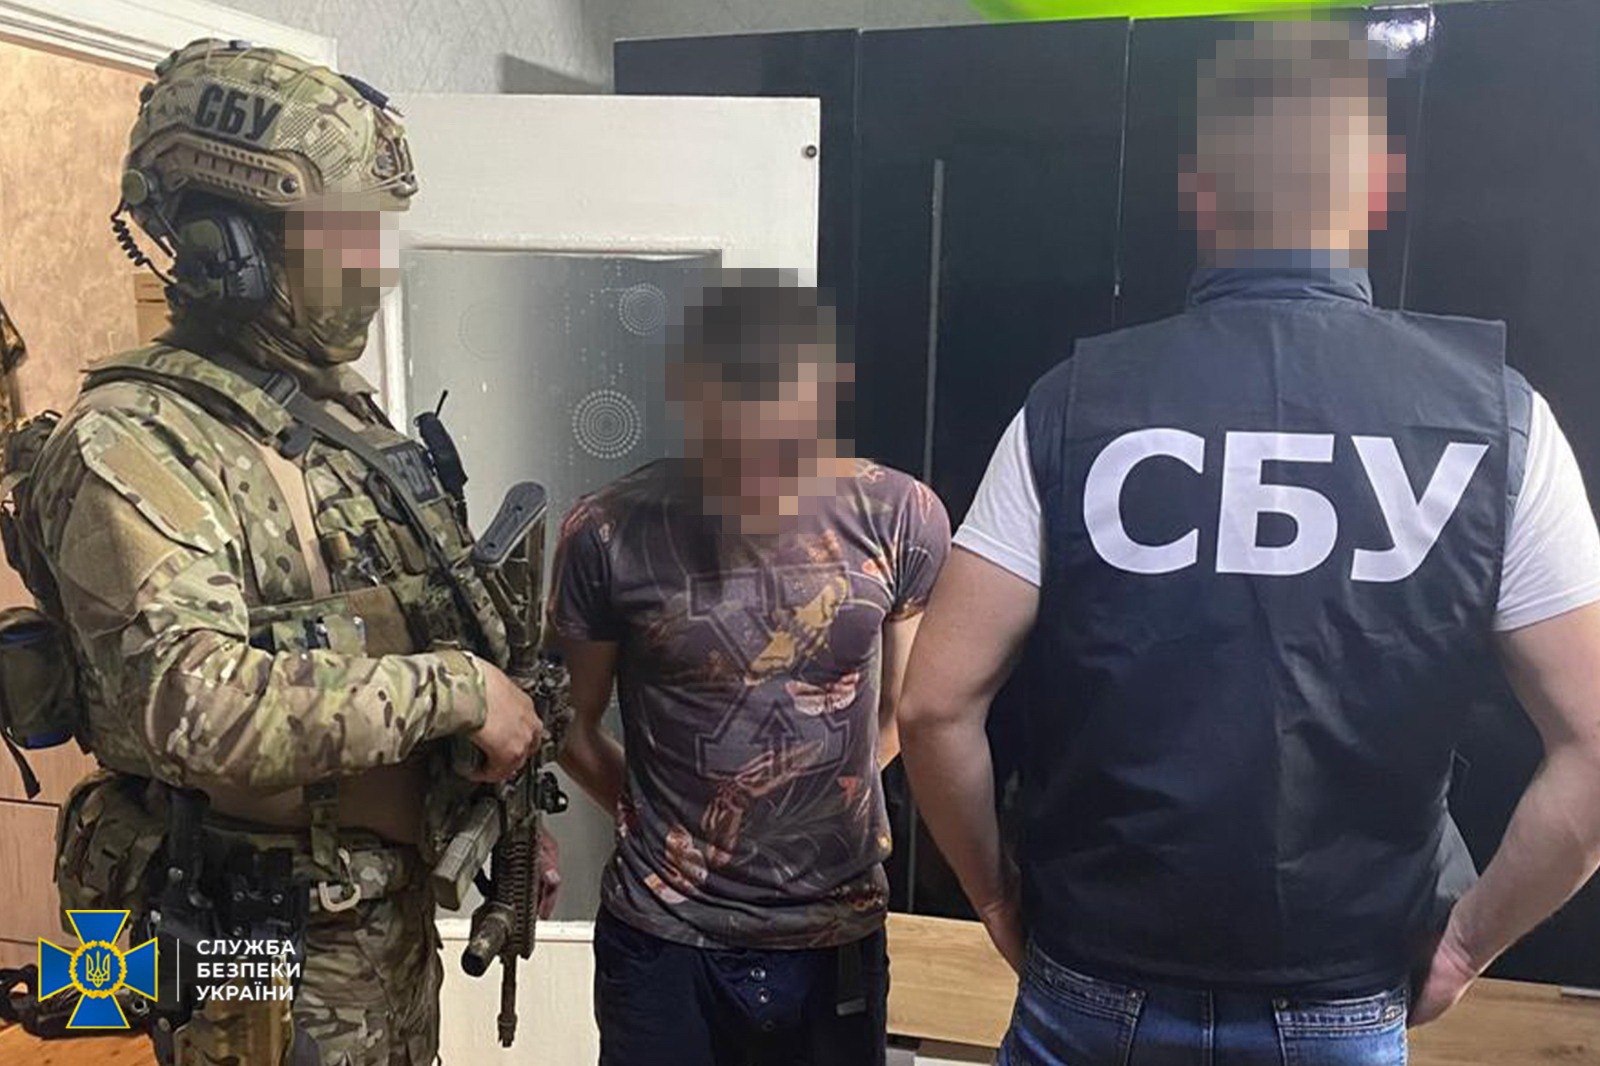 SBU neutralizes 3 more schemes of illegal departure of Ukrainians of military age abroad (Image Courtesy: Facebook)